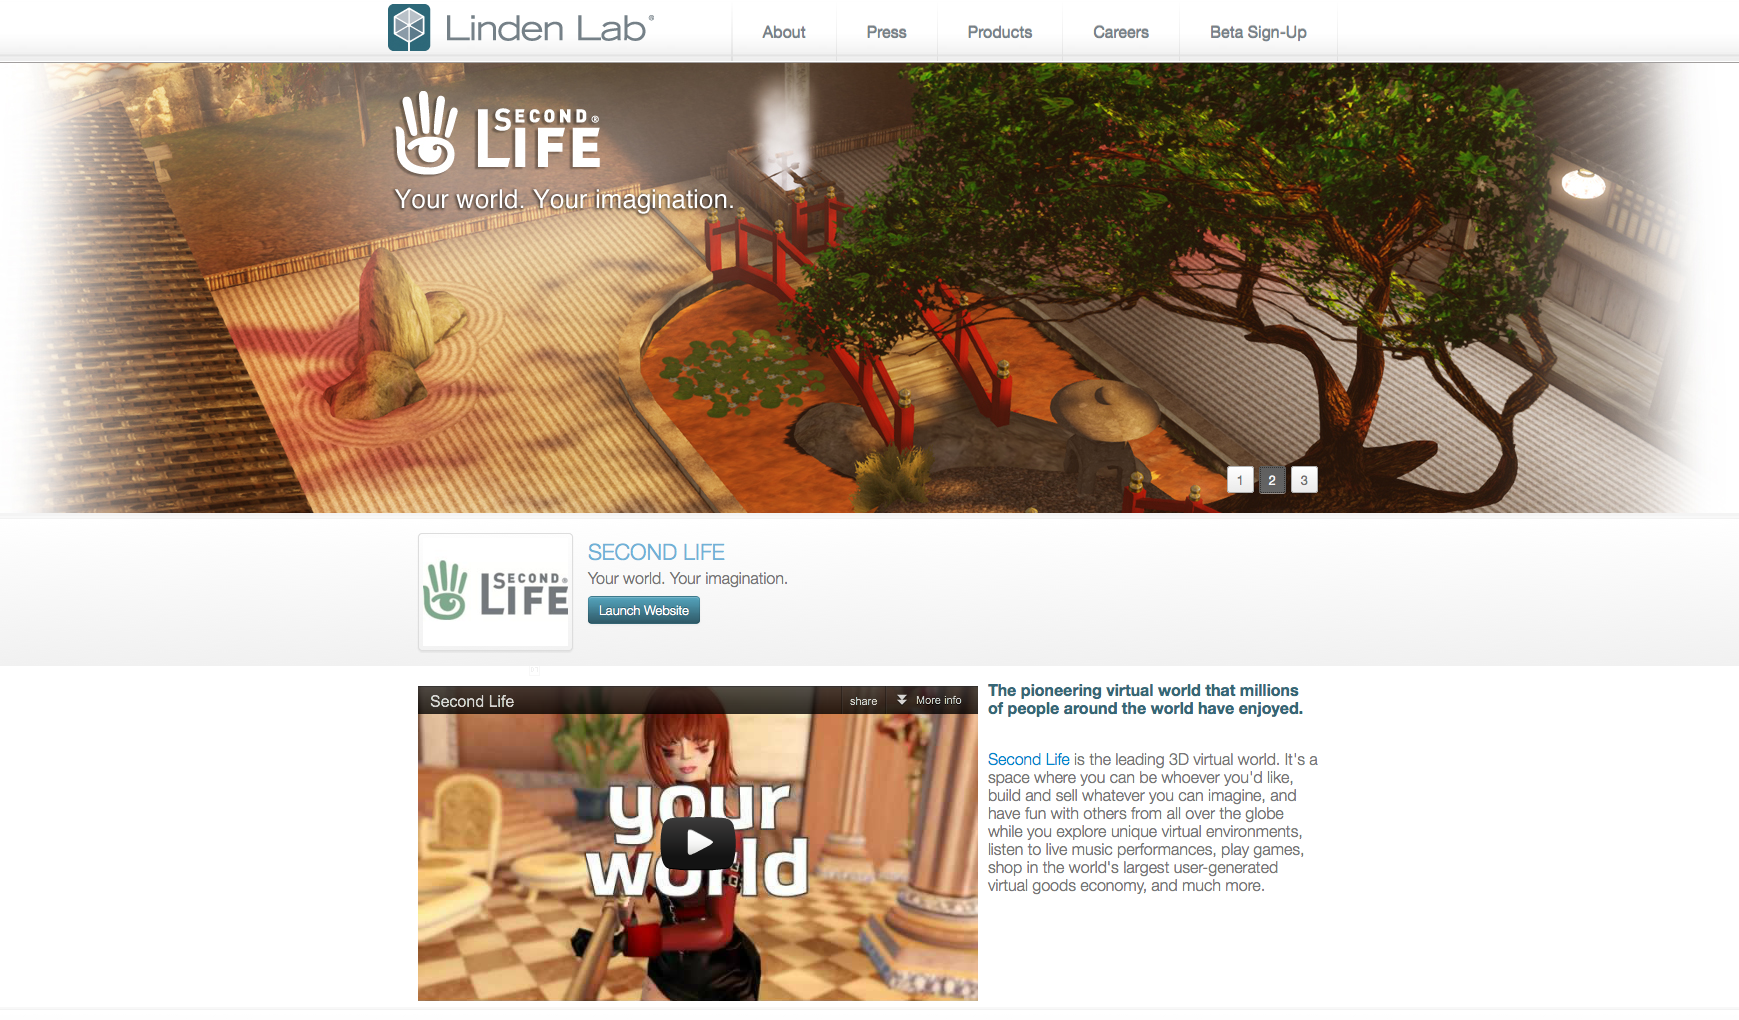 The Second Life Tab of the new Linden Life website